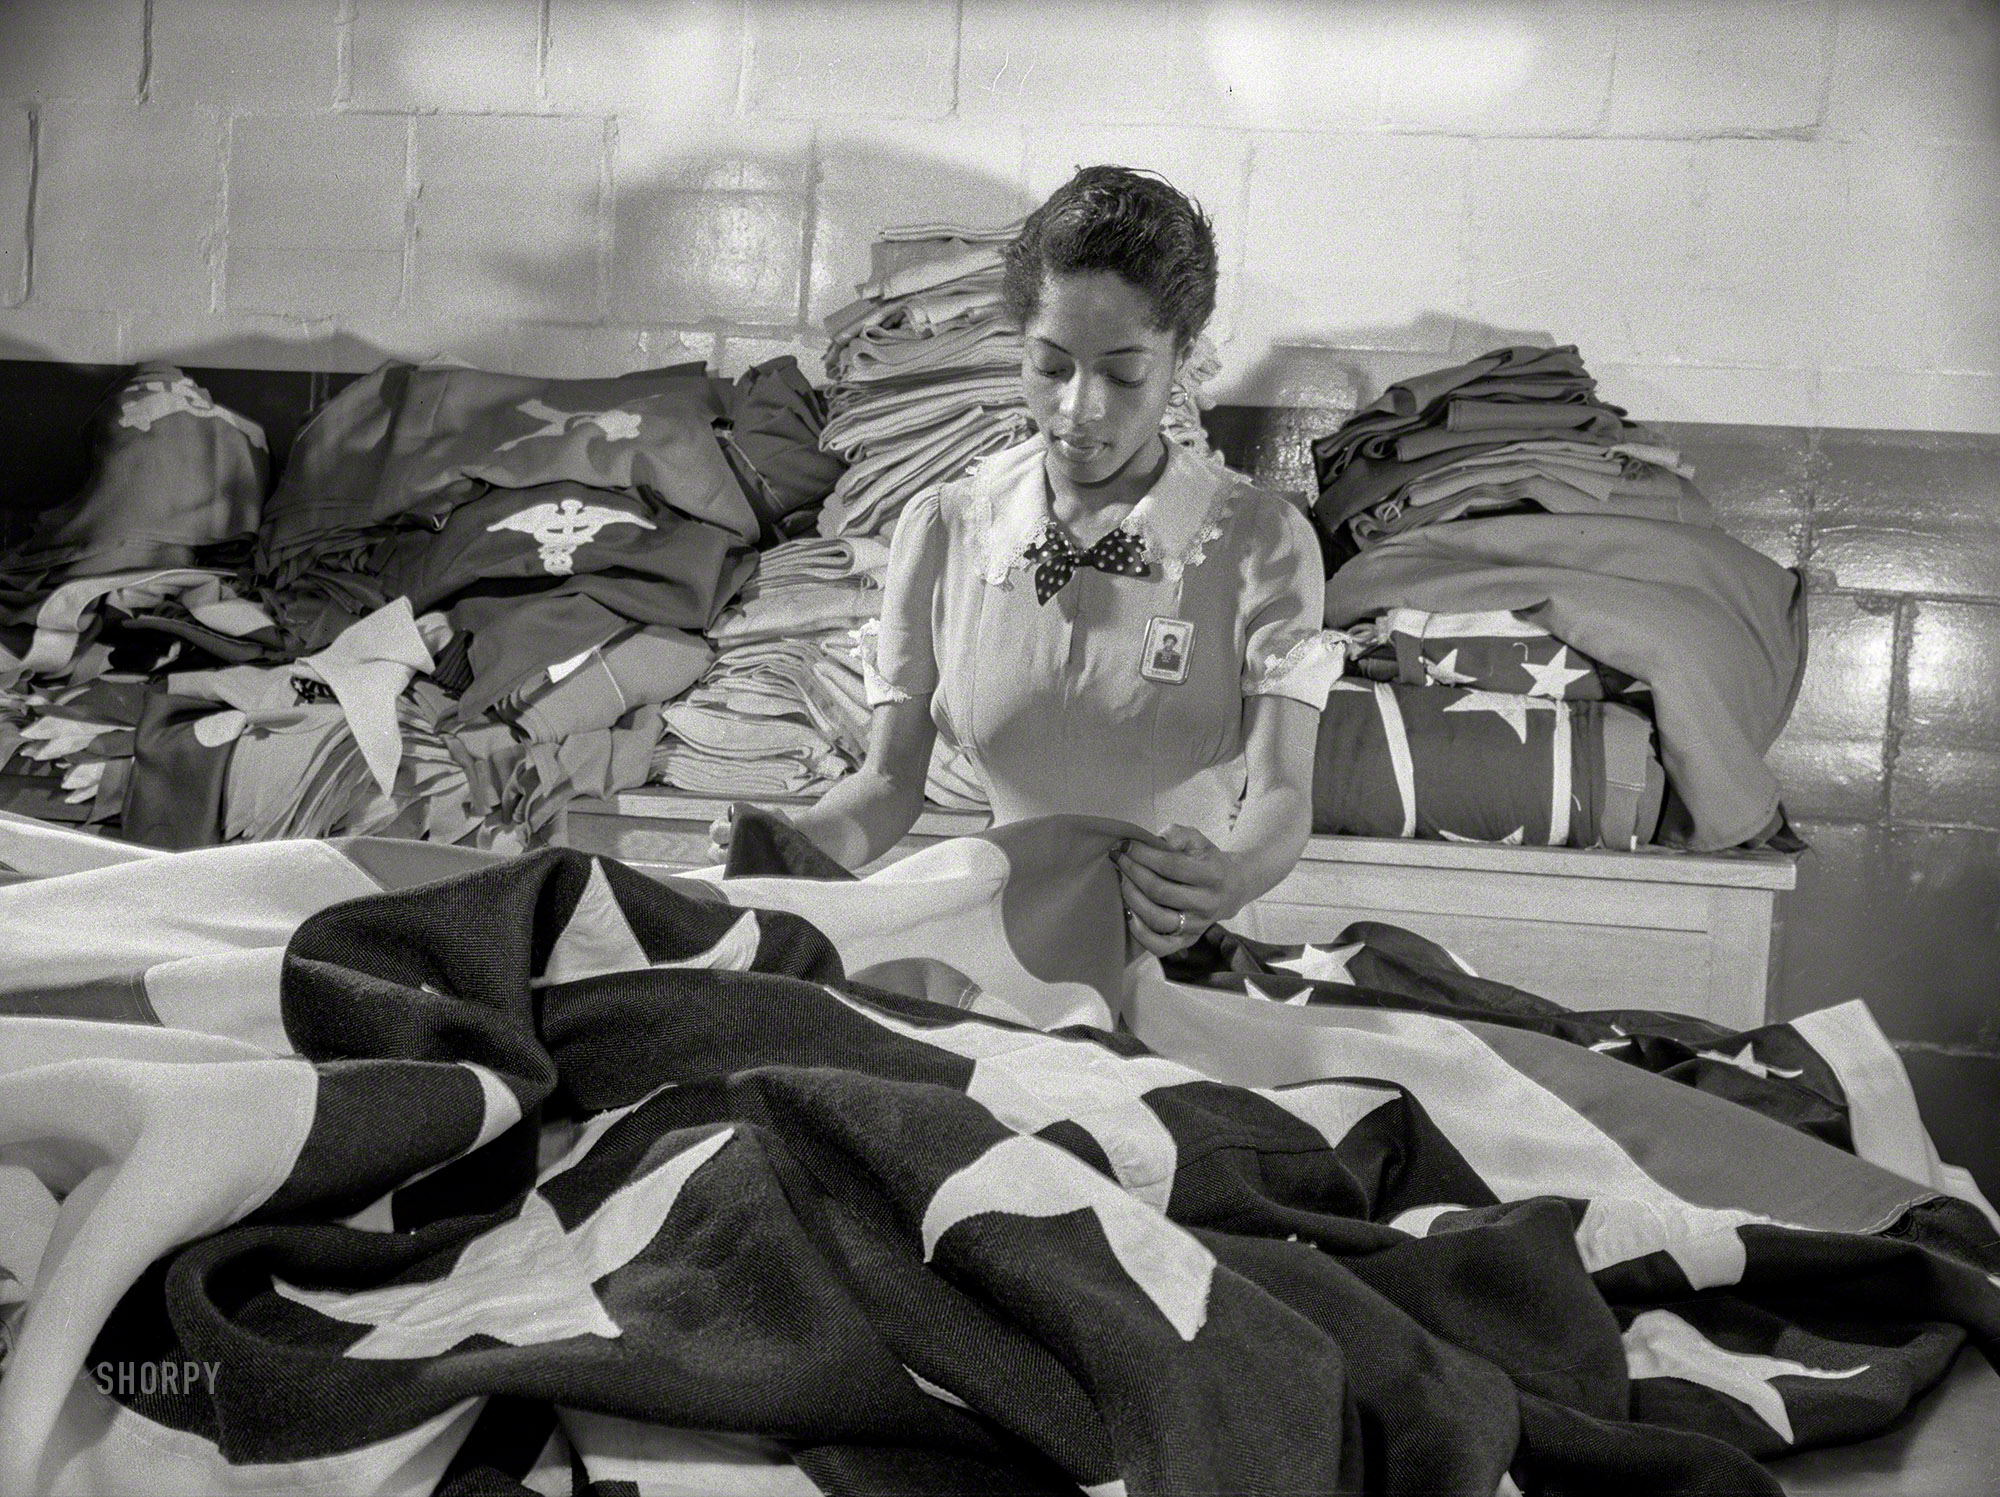 May 1942. "Philadelphia Quartermaster Corps. The tradition of Betsy Ross is being kept alive in this Quartermaster Corps depot, where a young woman worker assists in the creation of American flags for military activities." Happy Flag Day from Shorpy! 4x5 inch acetate negative by Howard Liberman for the Office of War Information. View full size.